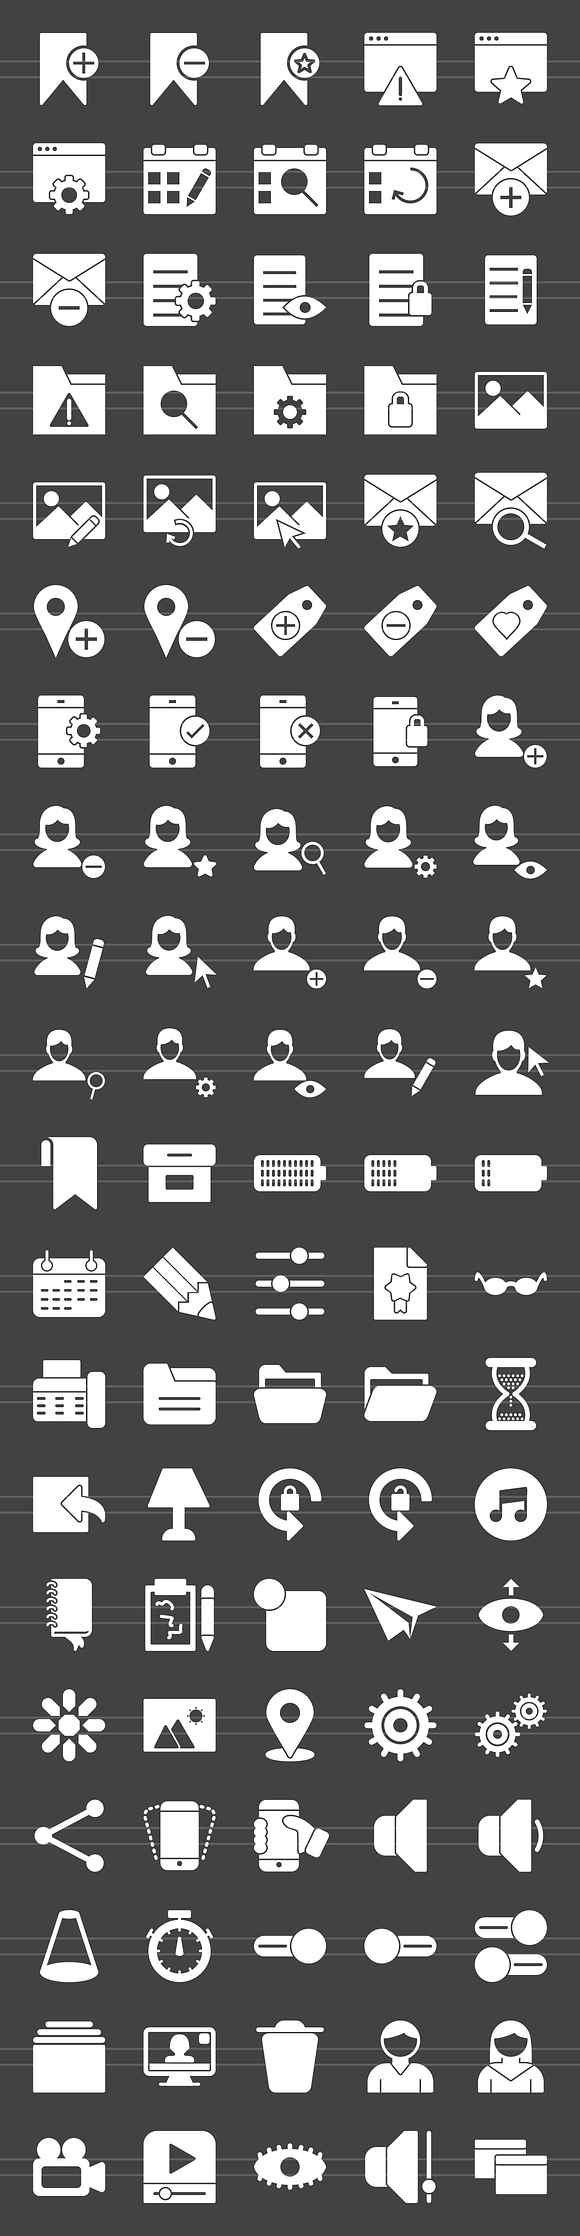 100 App & Web Interface Glyph Icons in Graphics - product preview 1